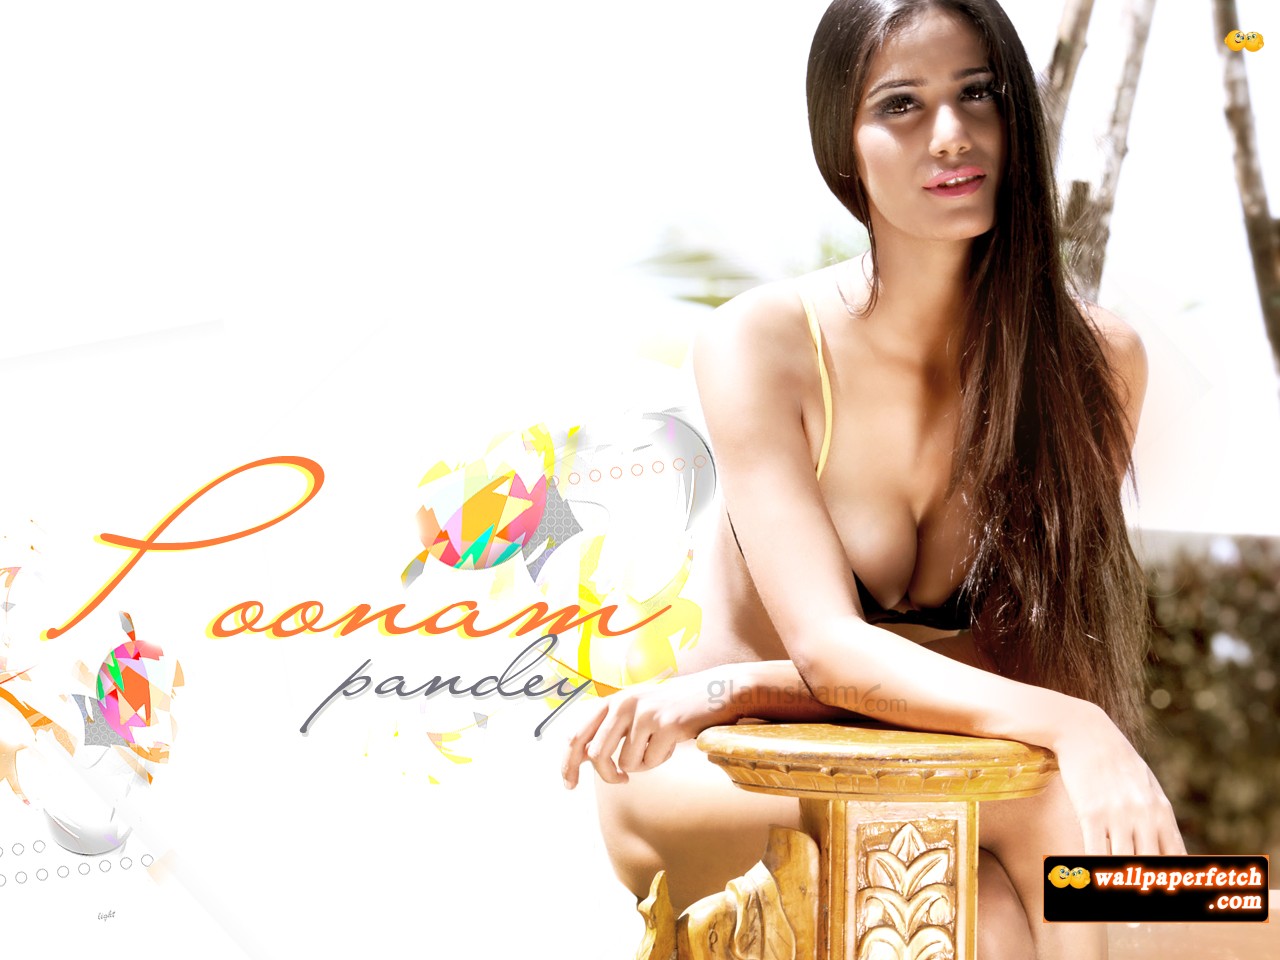 Wallpaper Fetch: Poonam Pandey Sexy Wallpapers